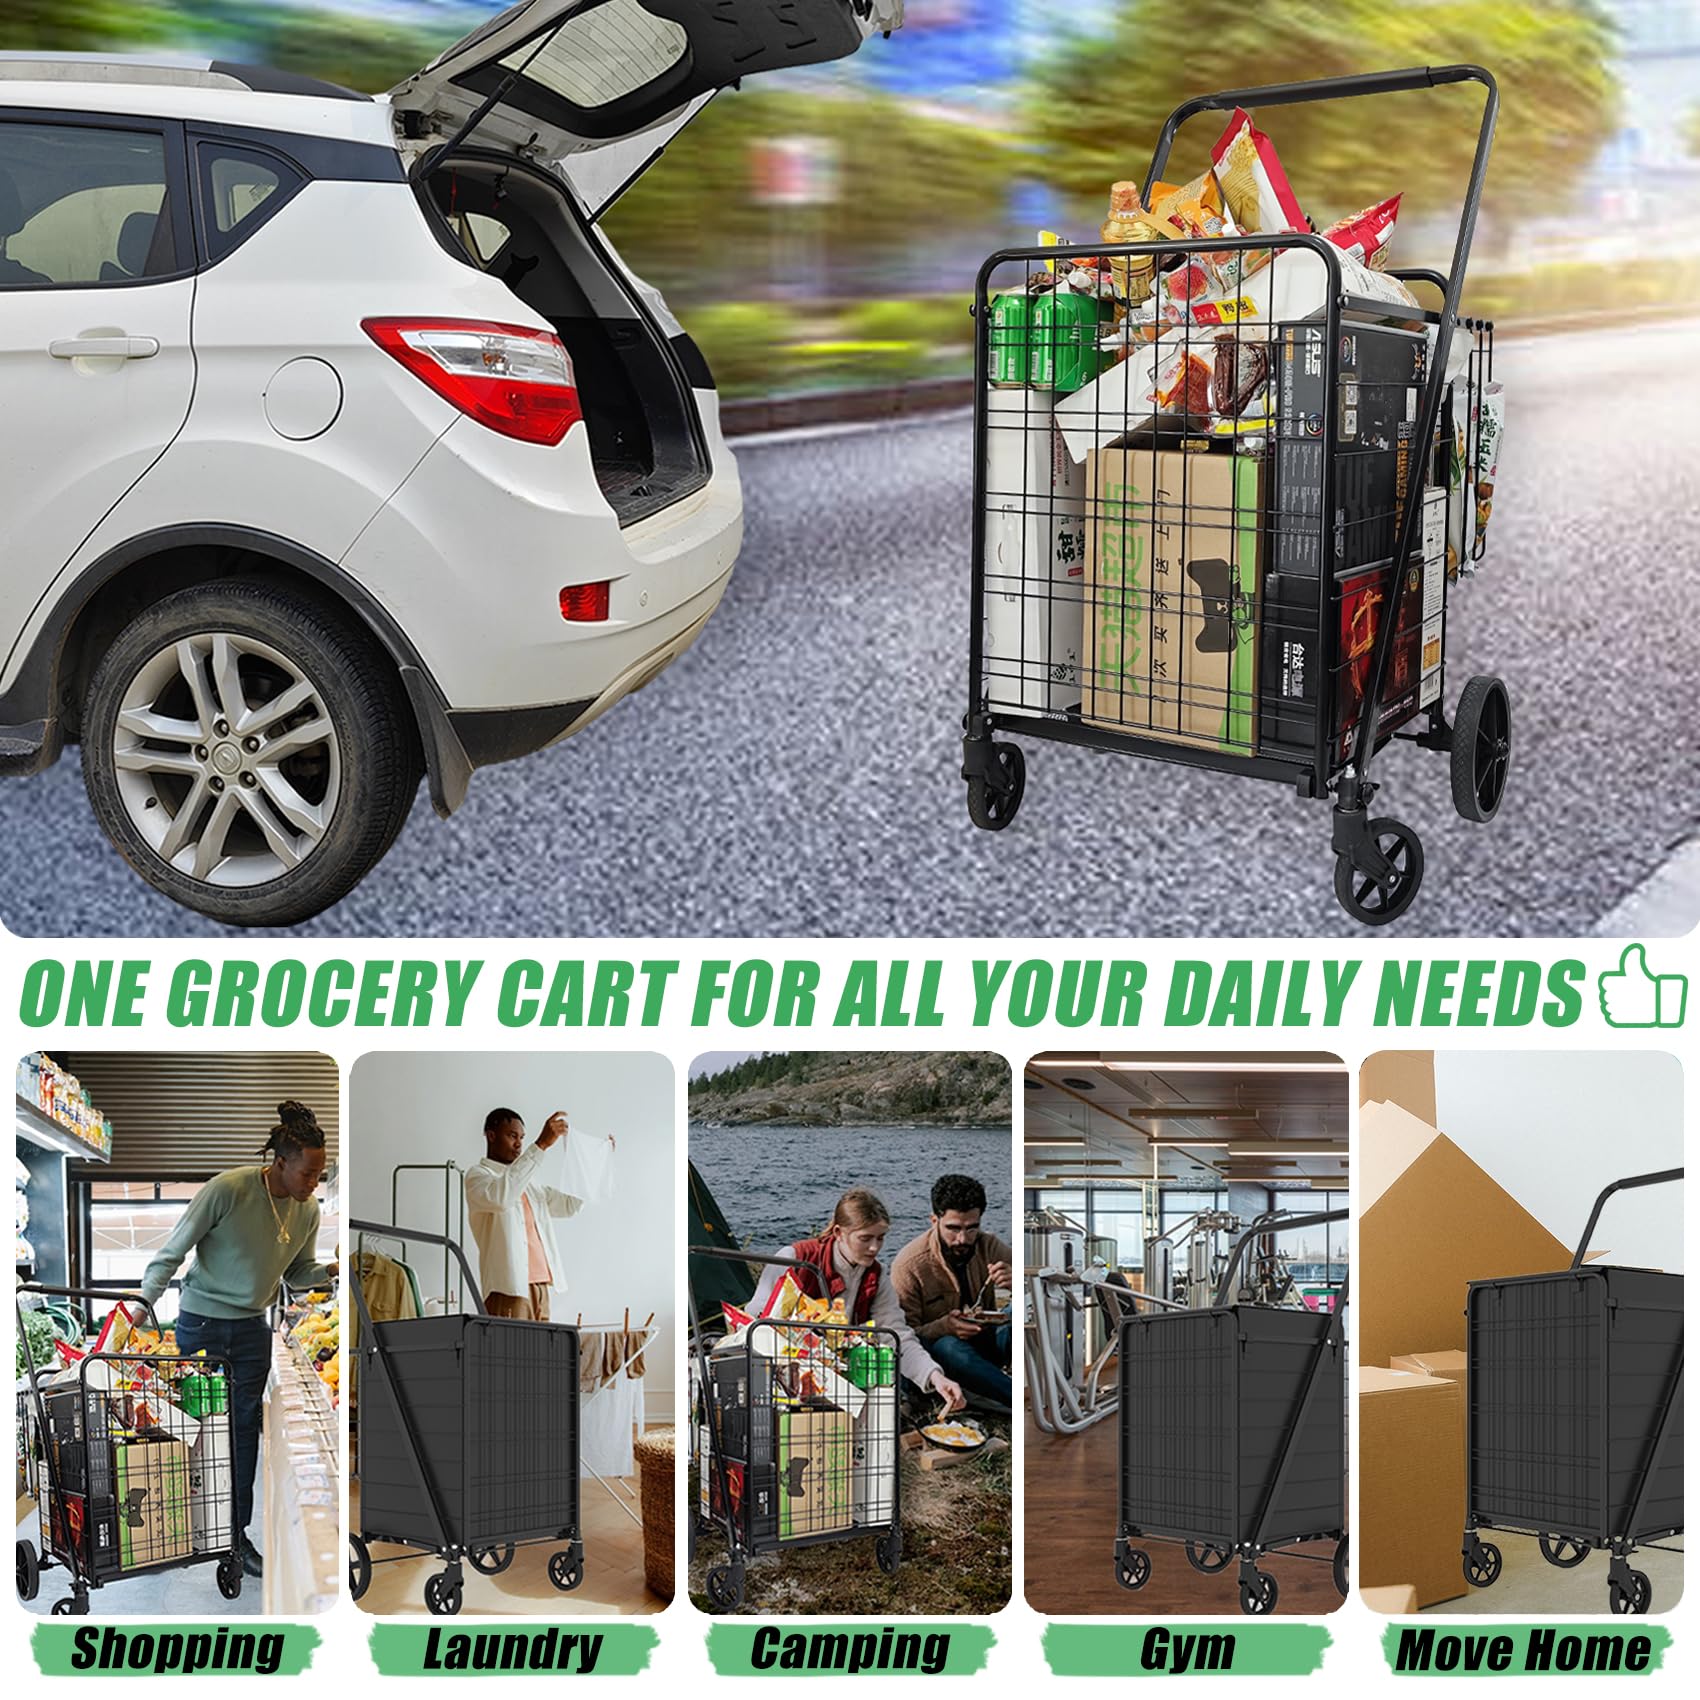 Jumbo Shopping Cart for Groceries, 30.7 Gallons Folding Grocery Cart with Waterproof Bag, 360° Swivel Wheels & Double Basket, Portable Heavy Duty Utility Cart for Shopping/Laundry-Hold Up to 440 LBS